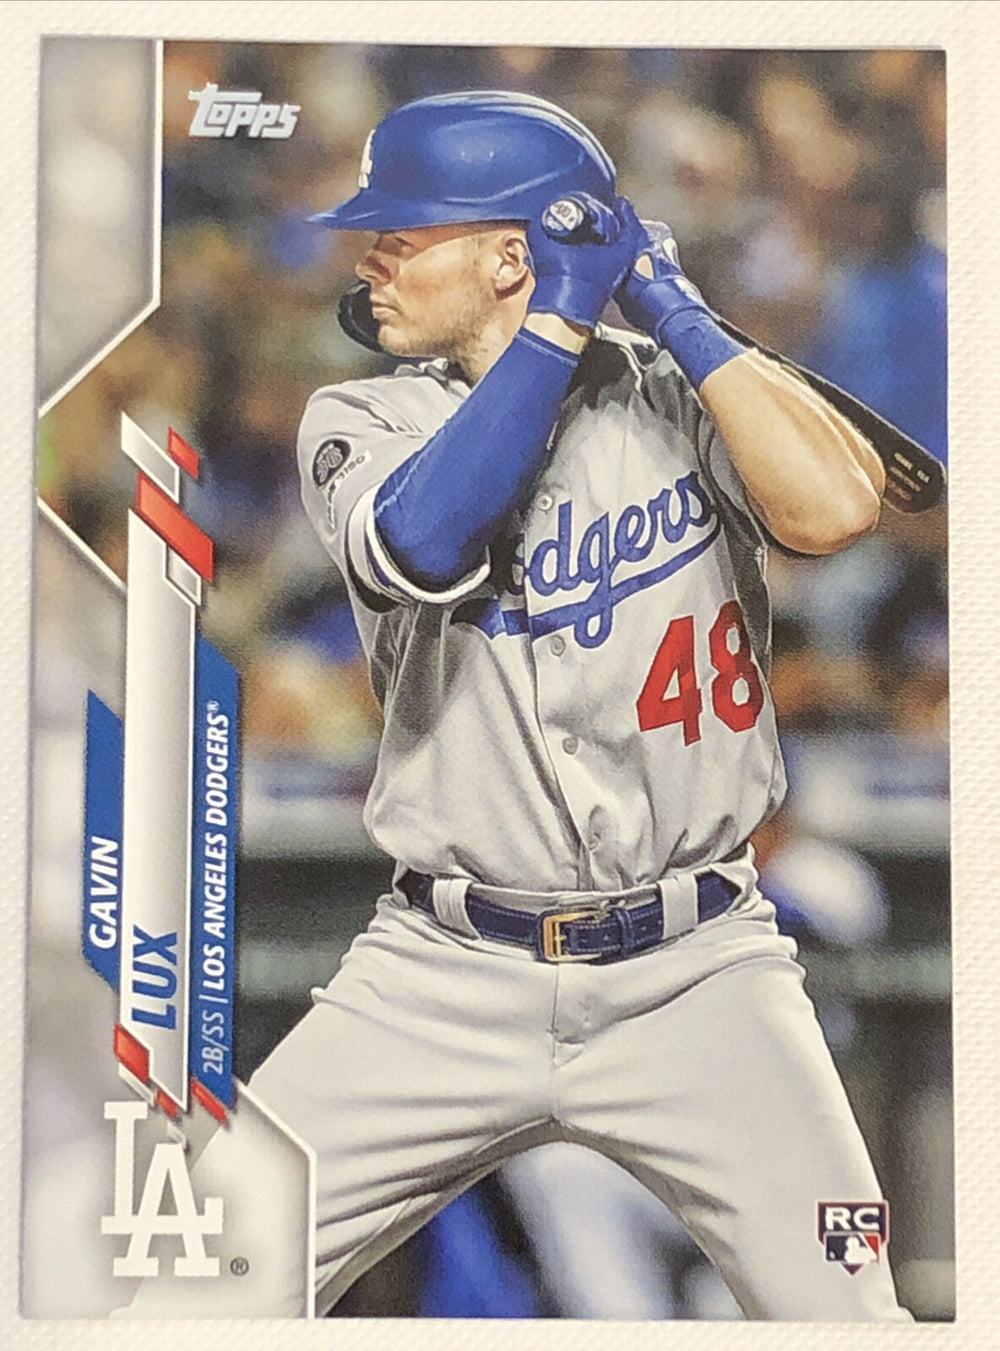 Gavin Lux 2020 Topps Factory Set Photo Variation Series Mint Rookie Card #292